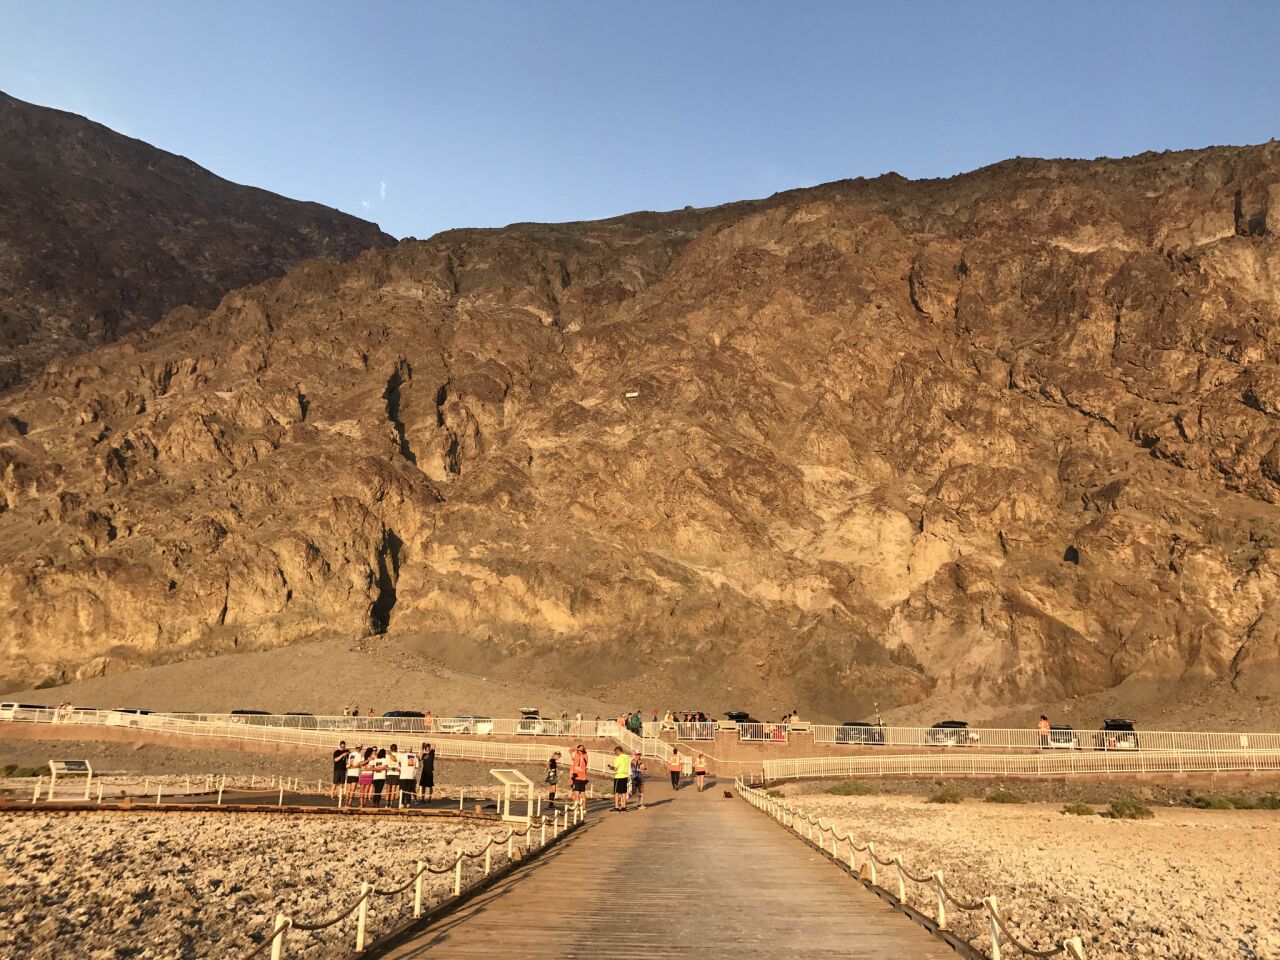 This is the view from the starting line of the Badwater Ultramarathon. In 114 degree heat, runners set off on a 135-mile race that, for some, will last almost two days.